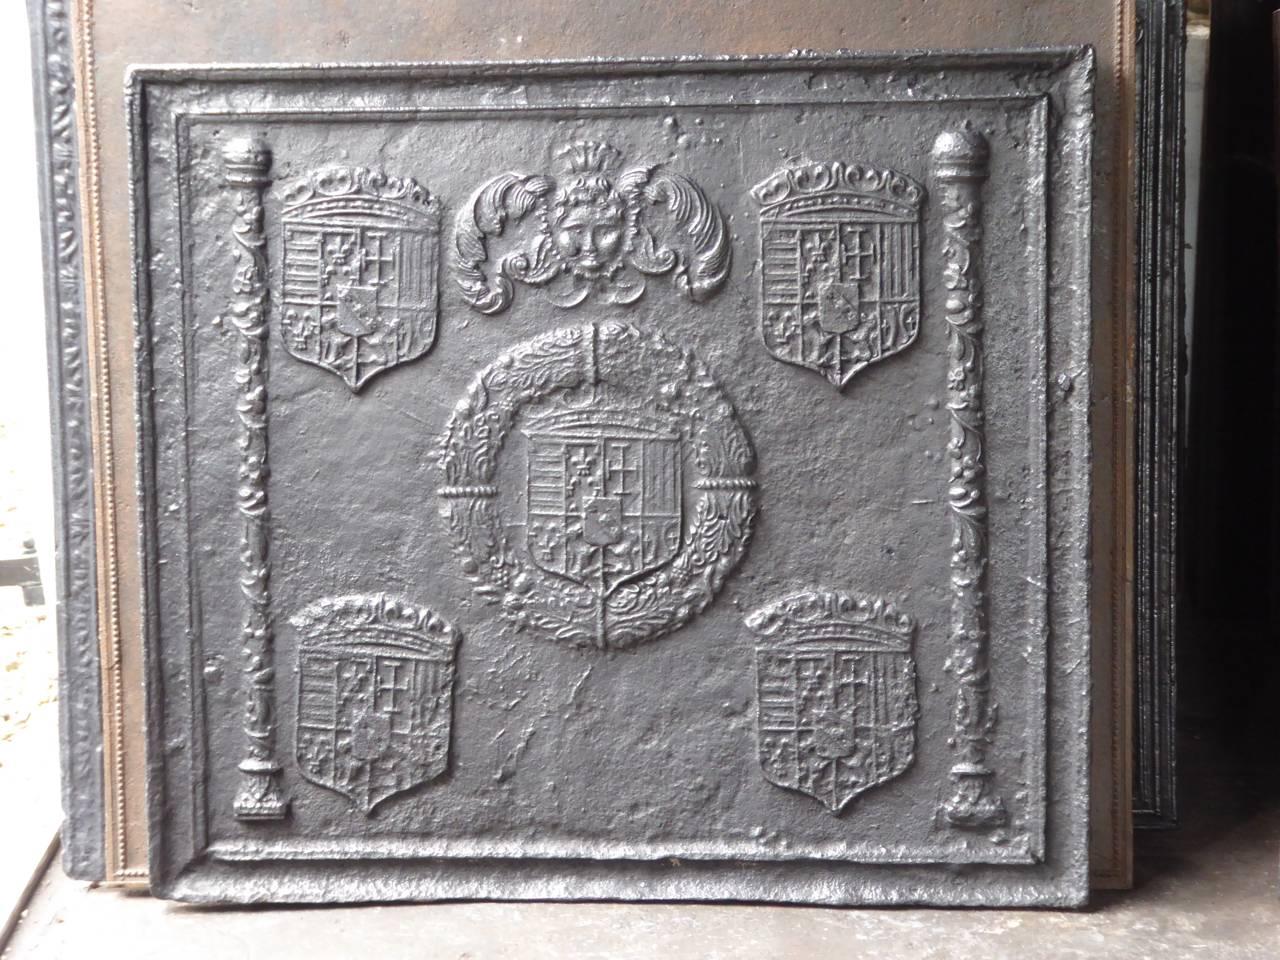 16th-17th century fireback with the coat of arms of Lorraine. On both sides there are the sticks of a marshal. This indicates that this fireback was made for a high military official at the time. The fireback is described by H.Carpentier, Plaques de